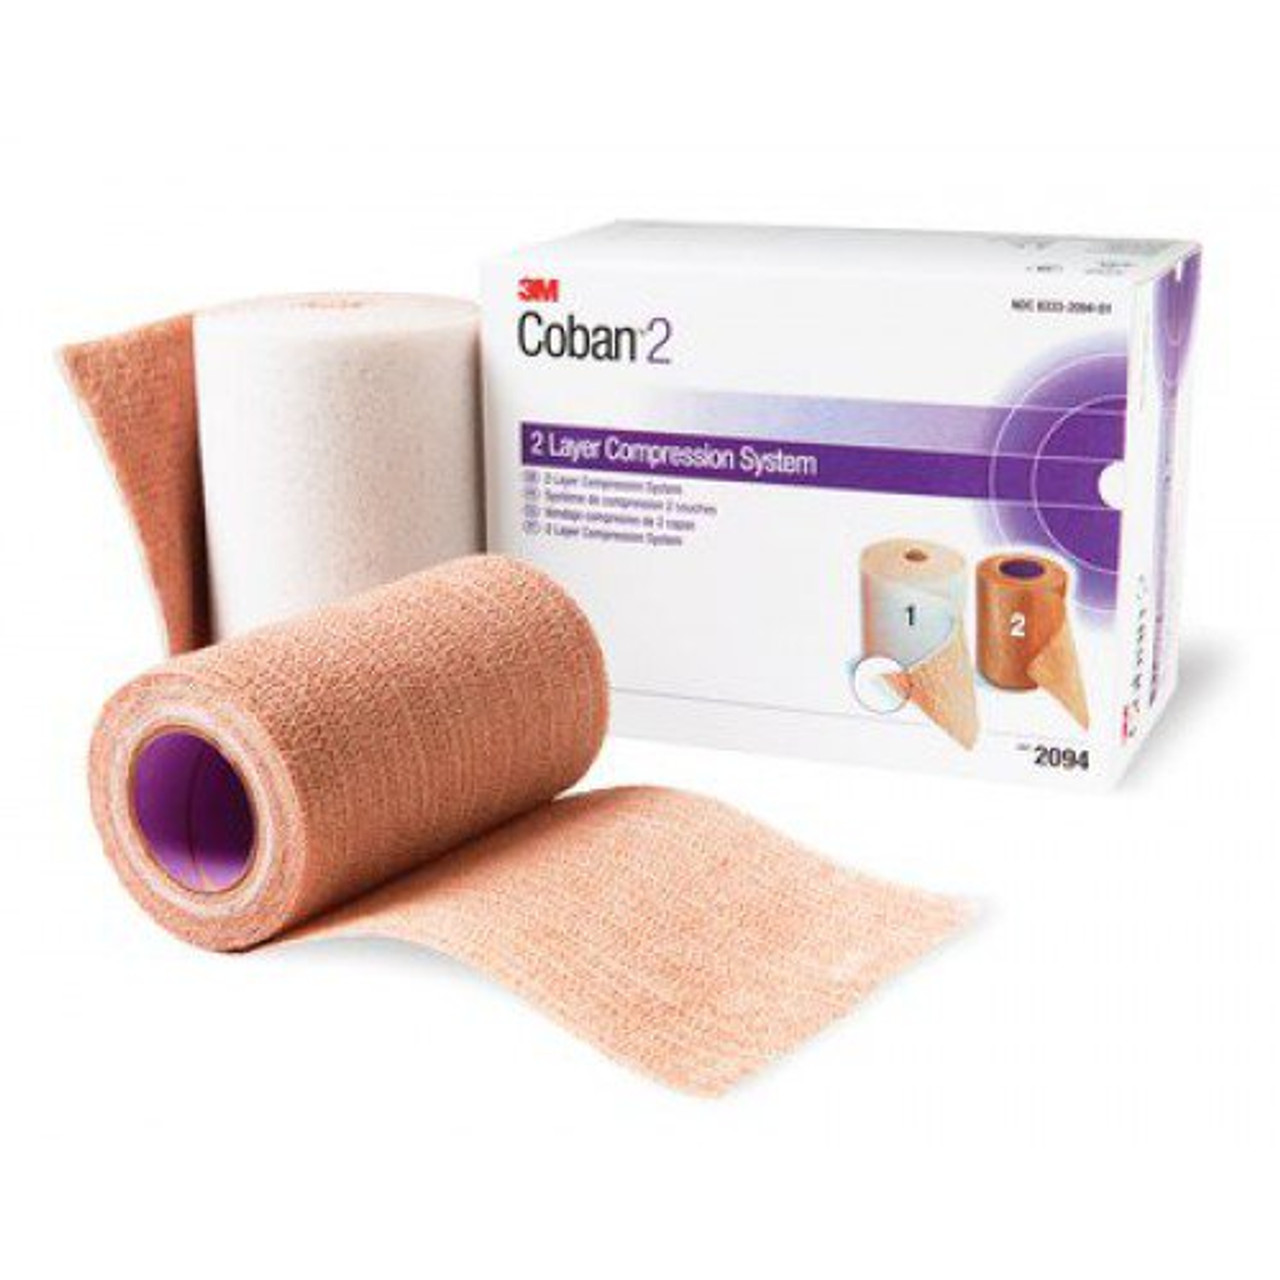 3M™ 2094N Coban™ 2 Two-Layer Compression System